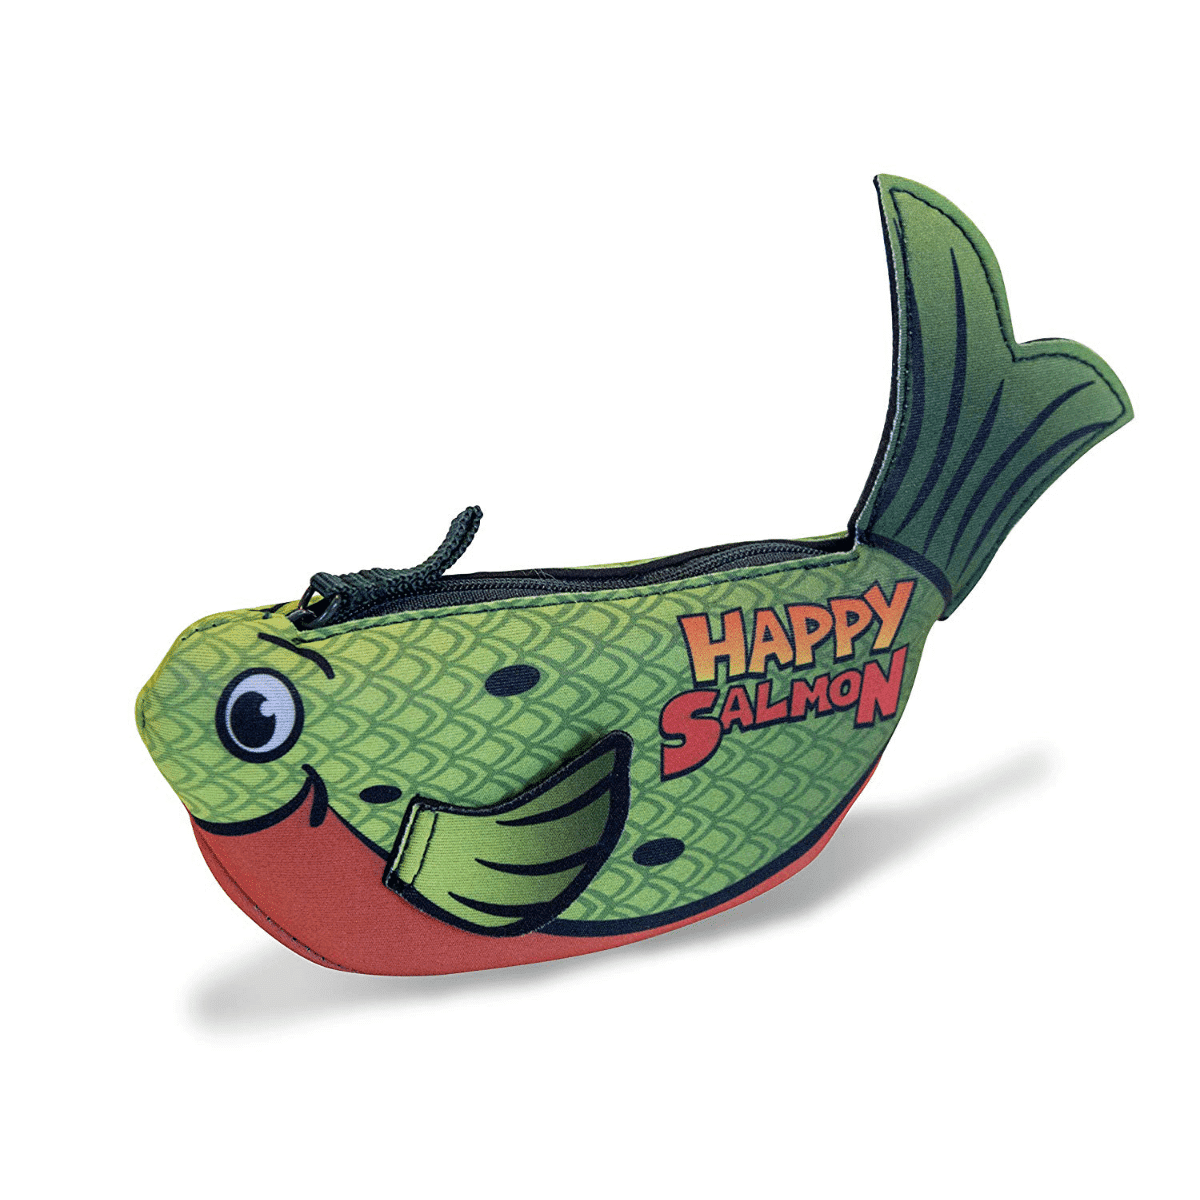 https://www.fortressofsolitude.co.za/wp-content/uploads/2021/05/Happy-Salmon-Review.png